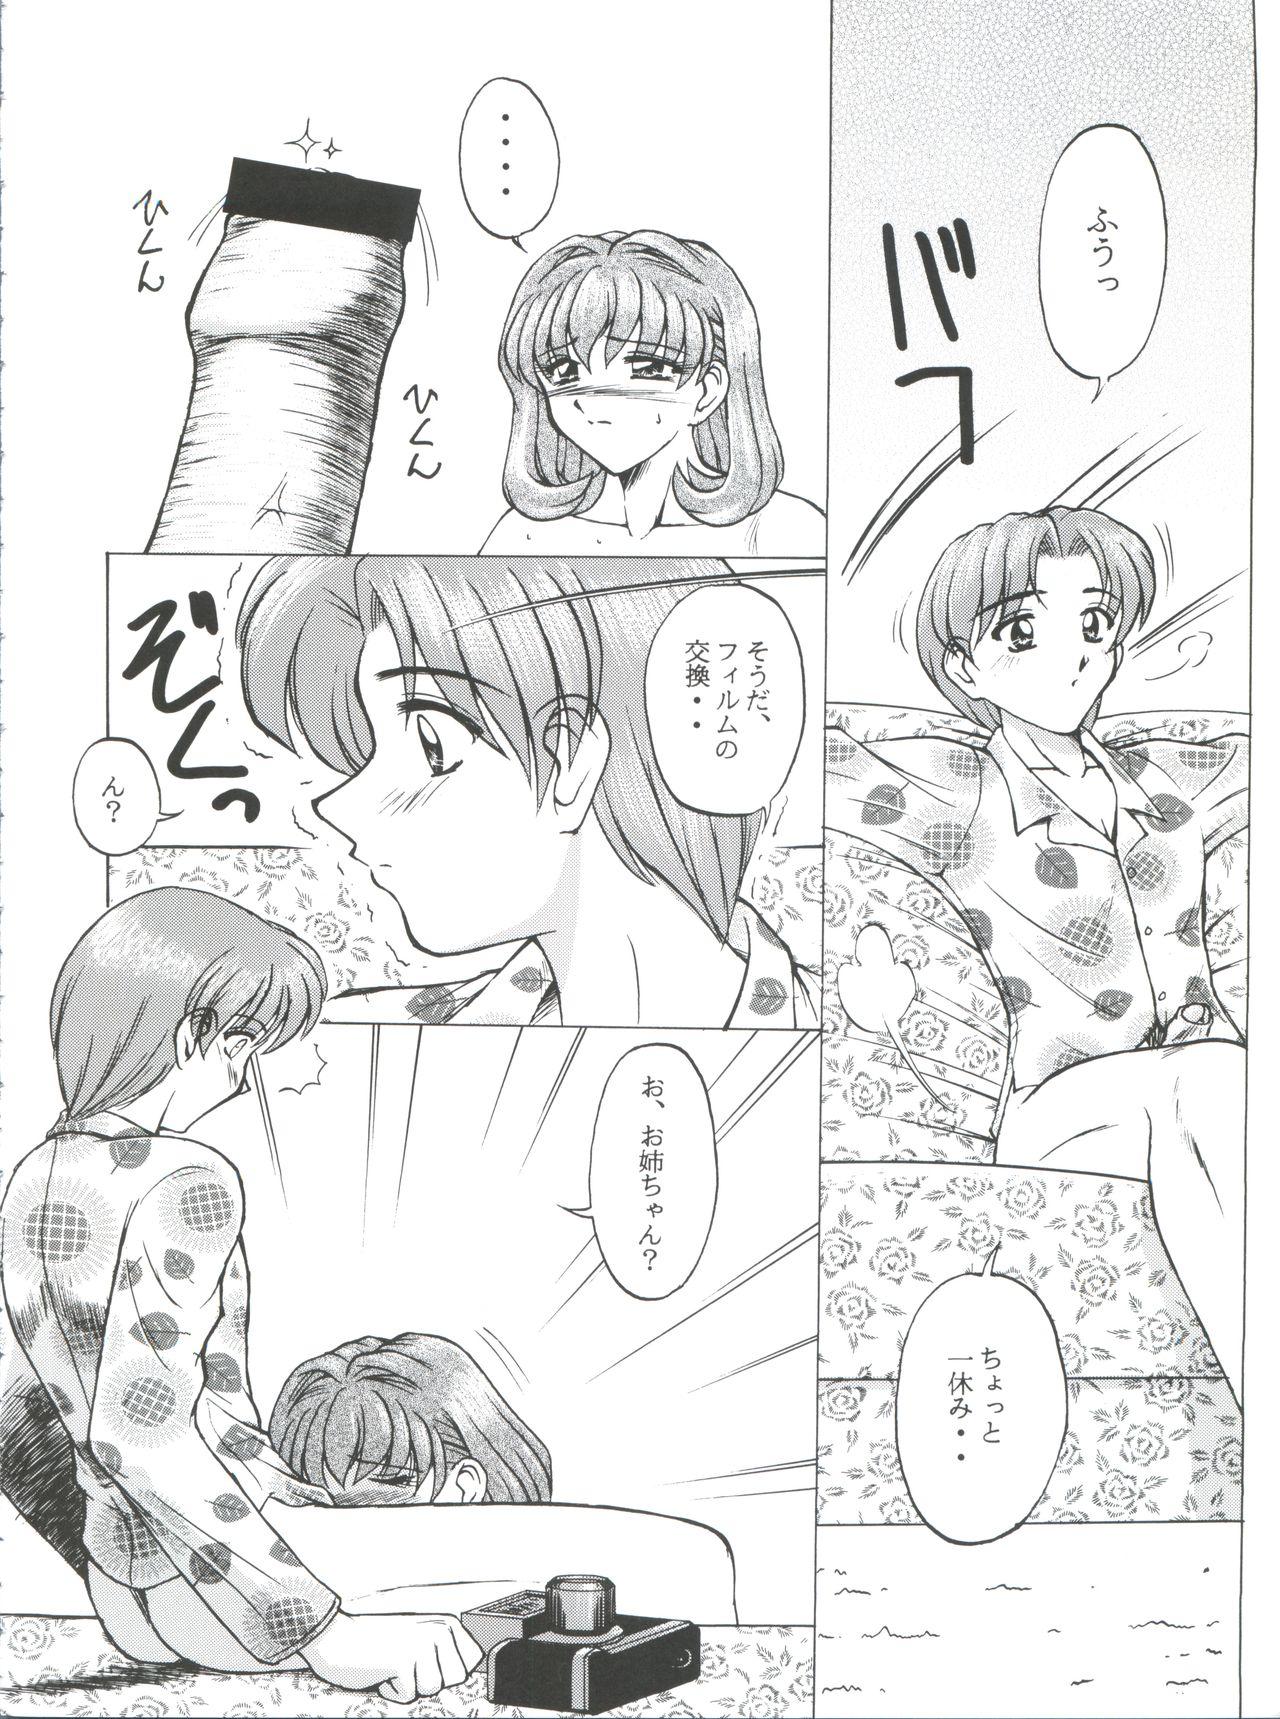 Big Ass Okachimentaiko Pikaichi - Rival schools Lupin iii Marvelous melmo Atelier marie Firsttime - Page 7